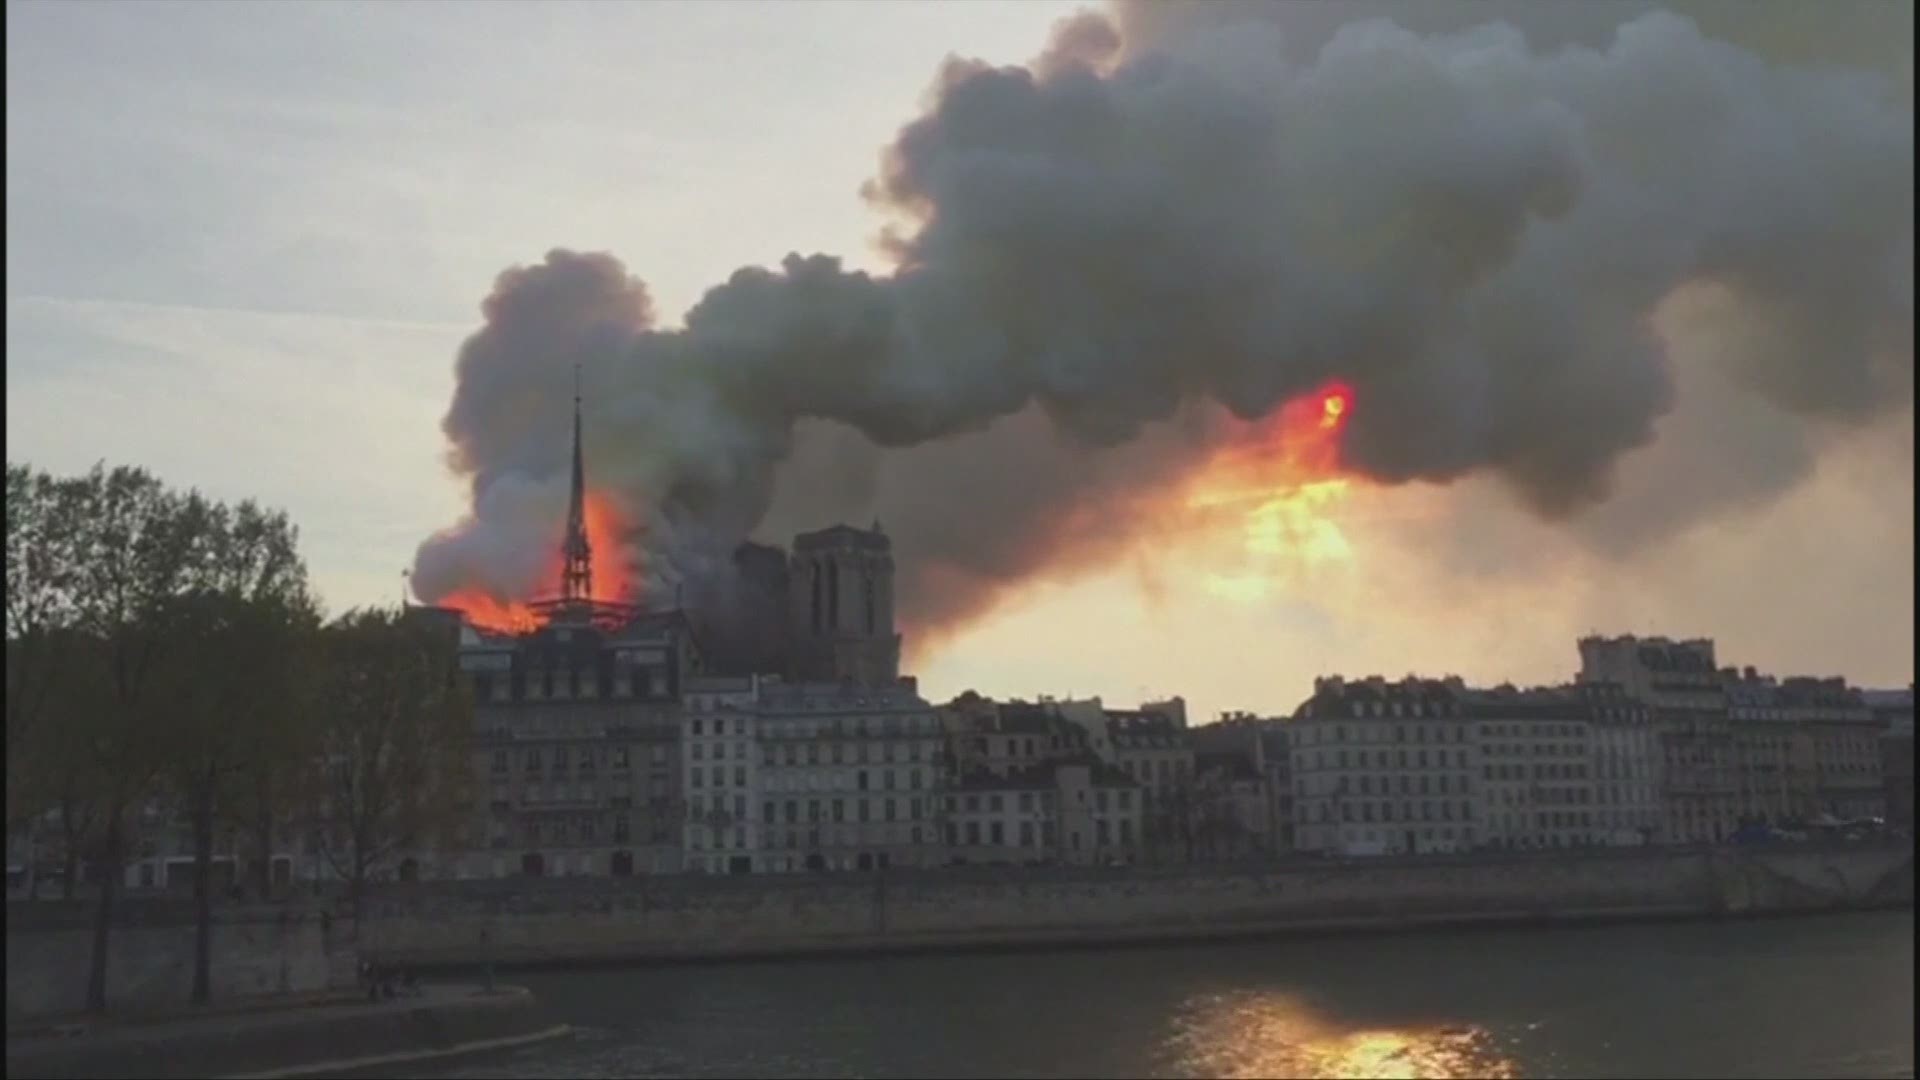 A fire has broken out at the world-famous Notre Dame cathedral in Paris.